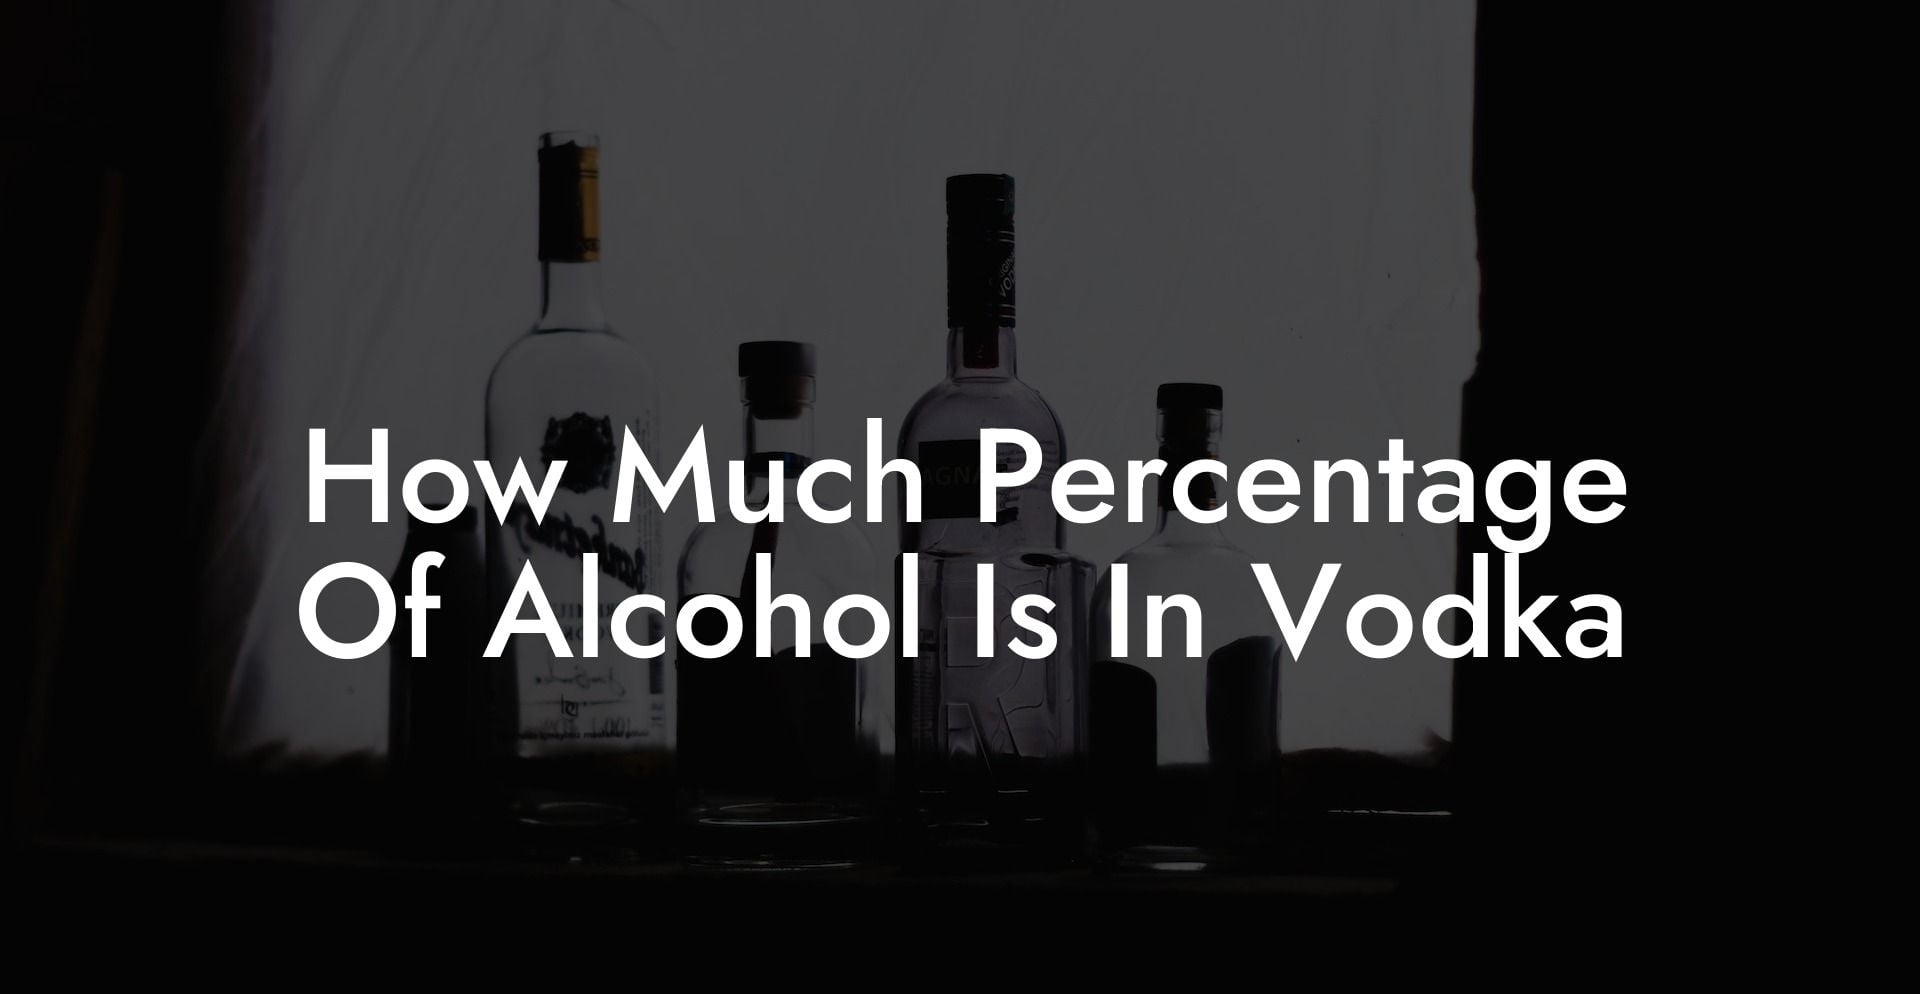 How Much Percentage Of Alcohol Is In Vodka